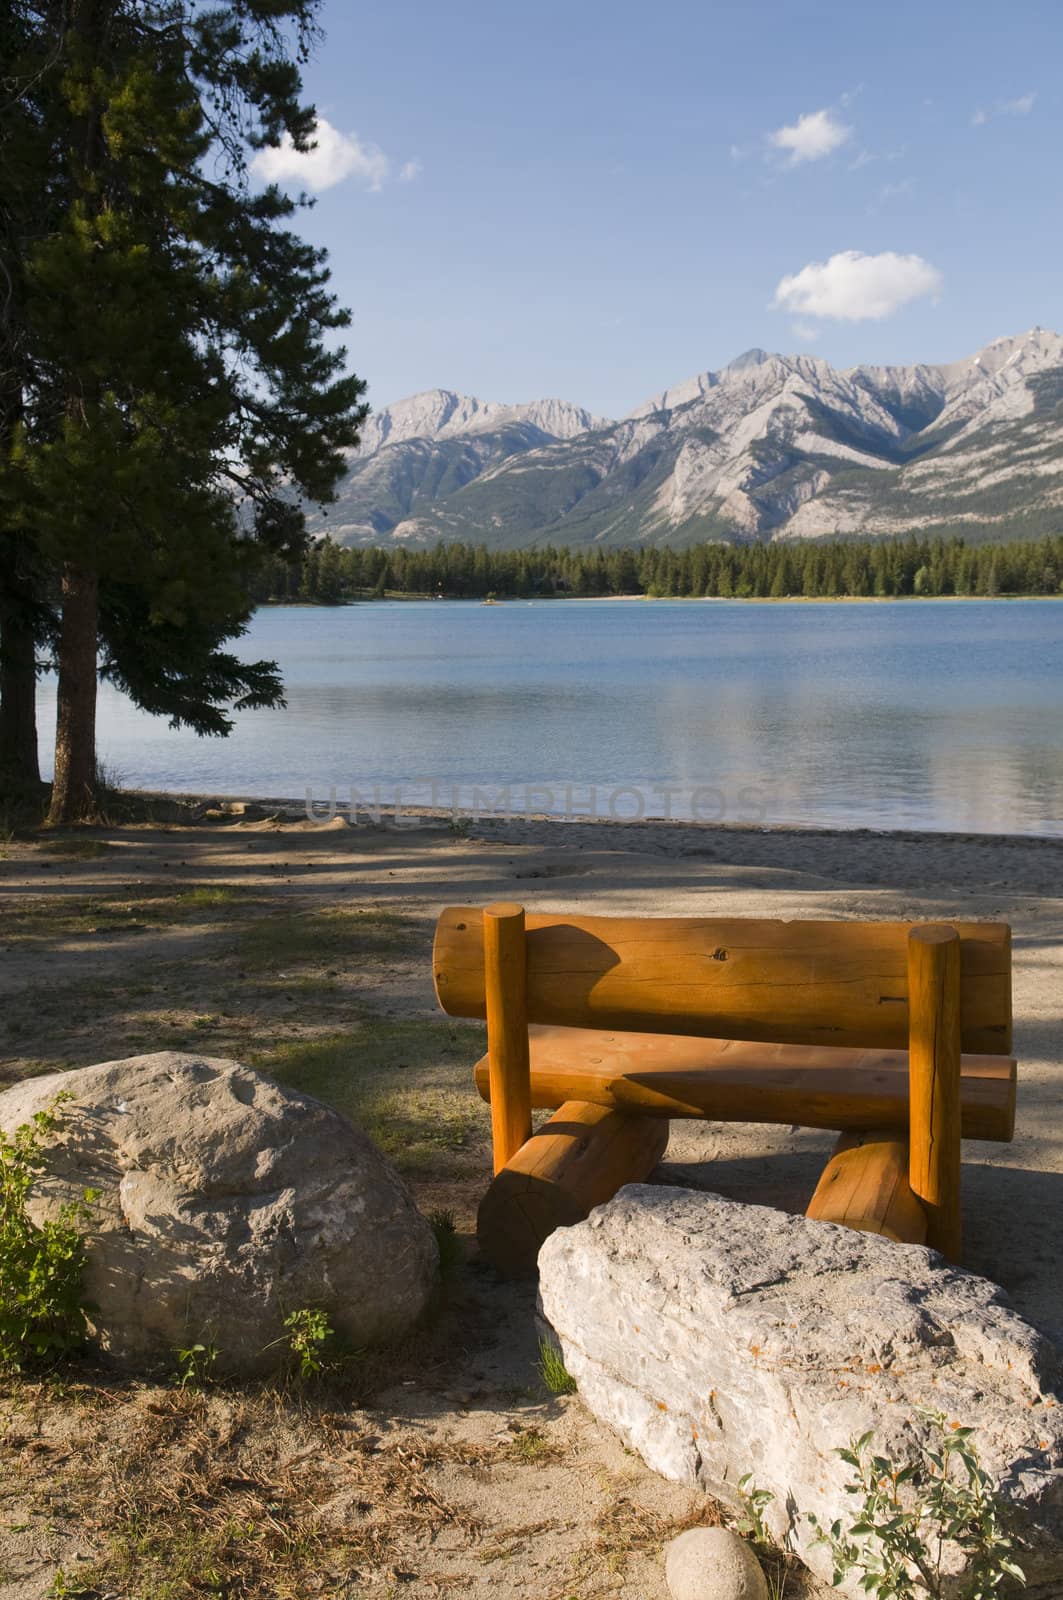 Pine bench at the shore of a lake in Jasper National Park, Alberta, Canada